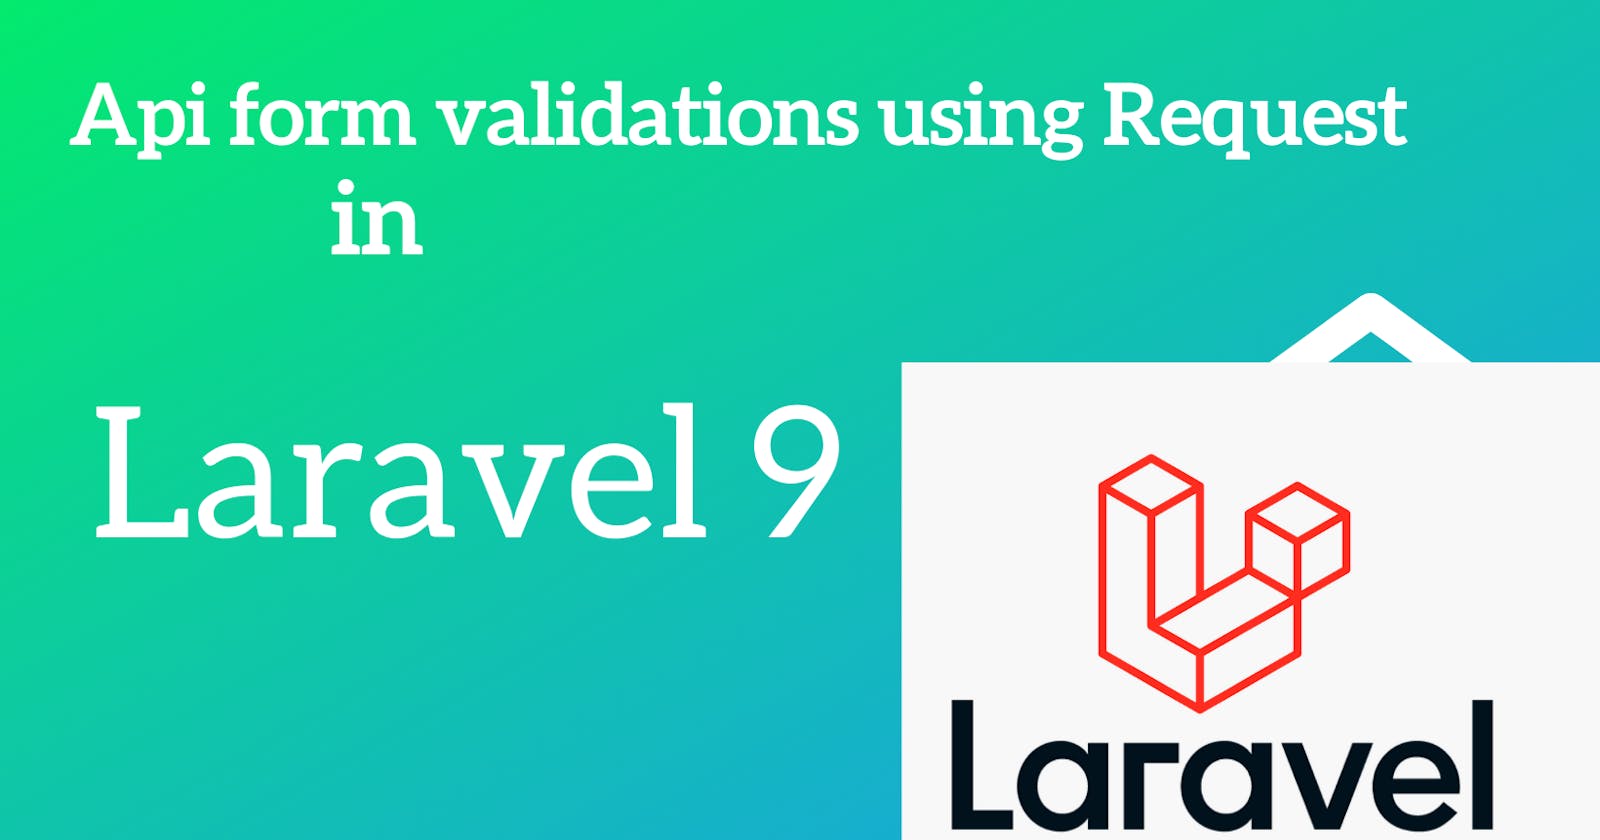 Laravel 9 Form Validation With Request for Api